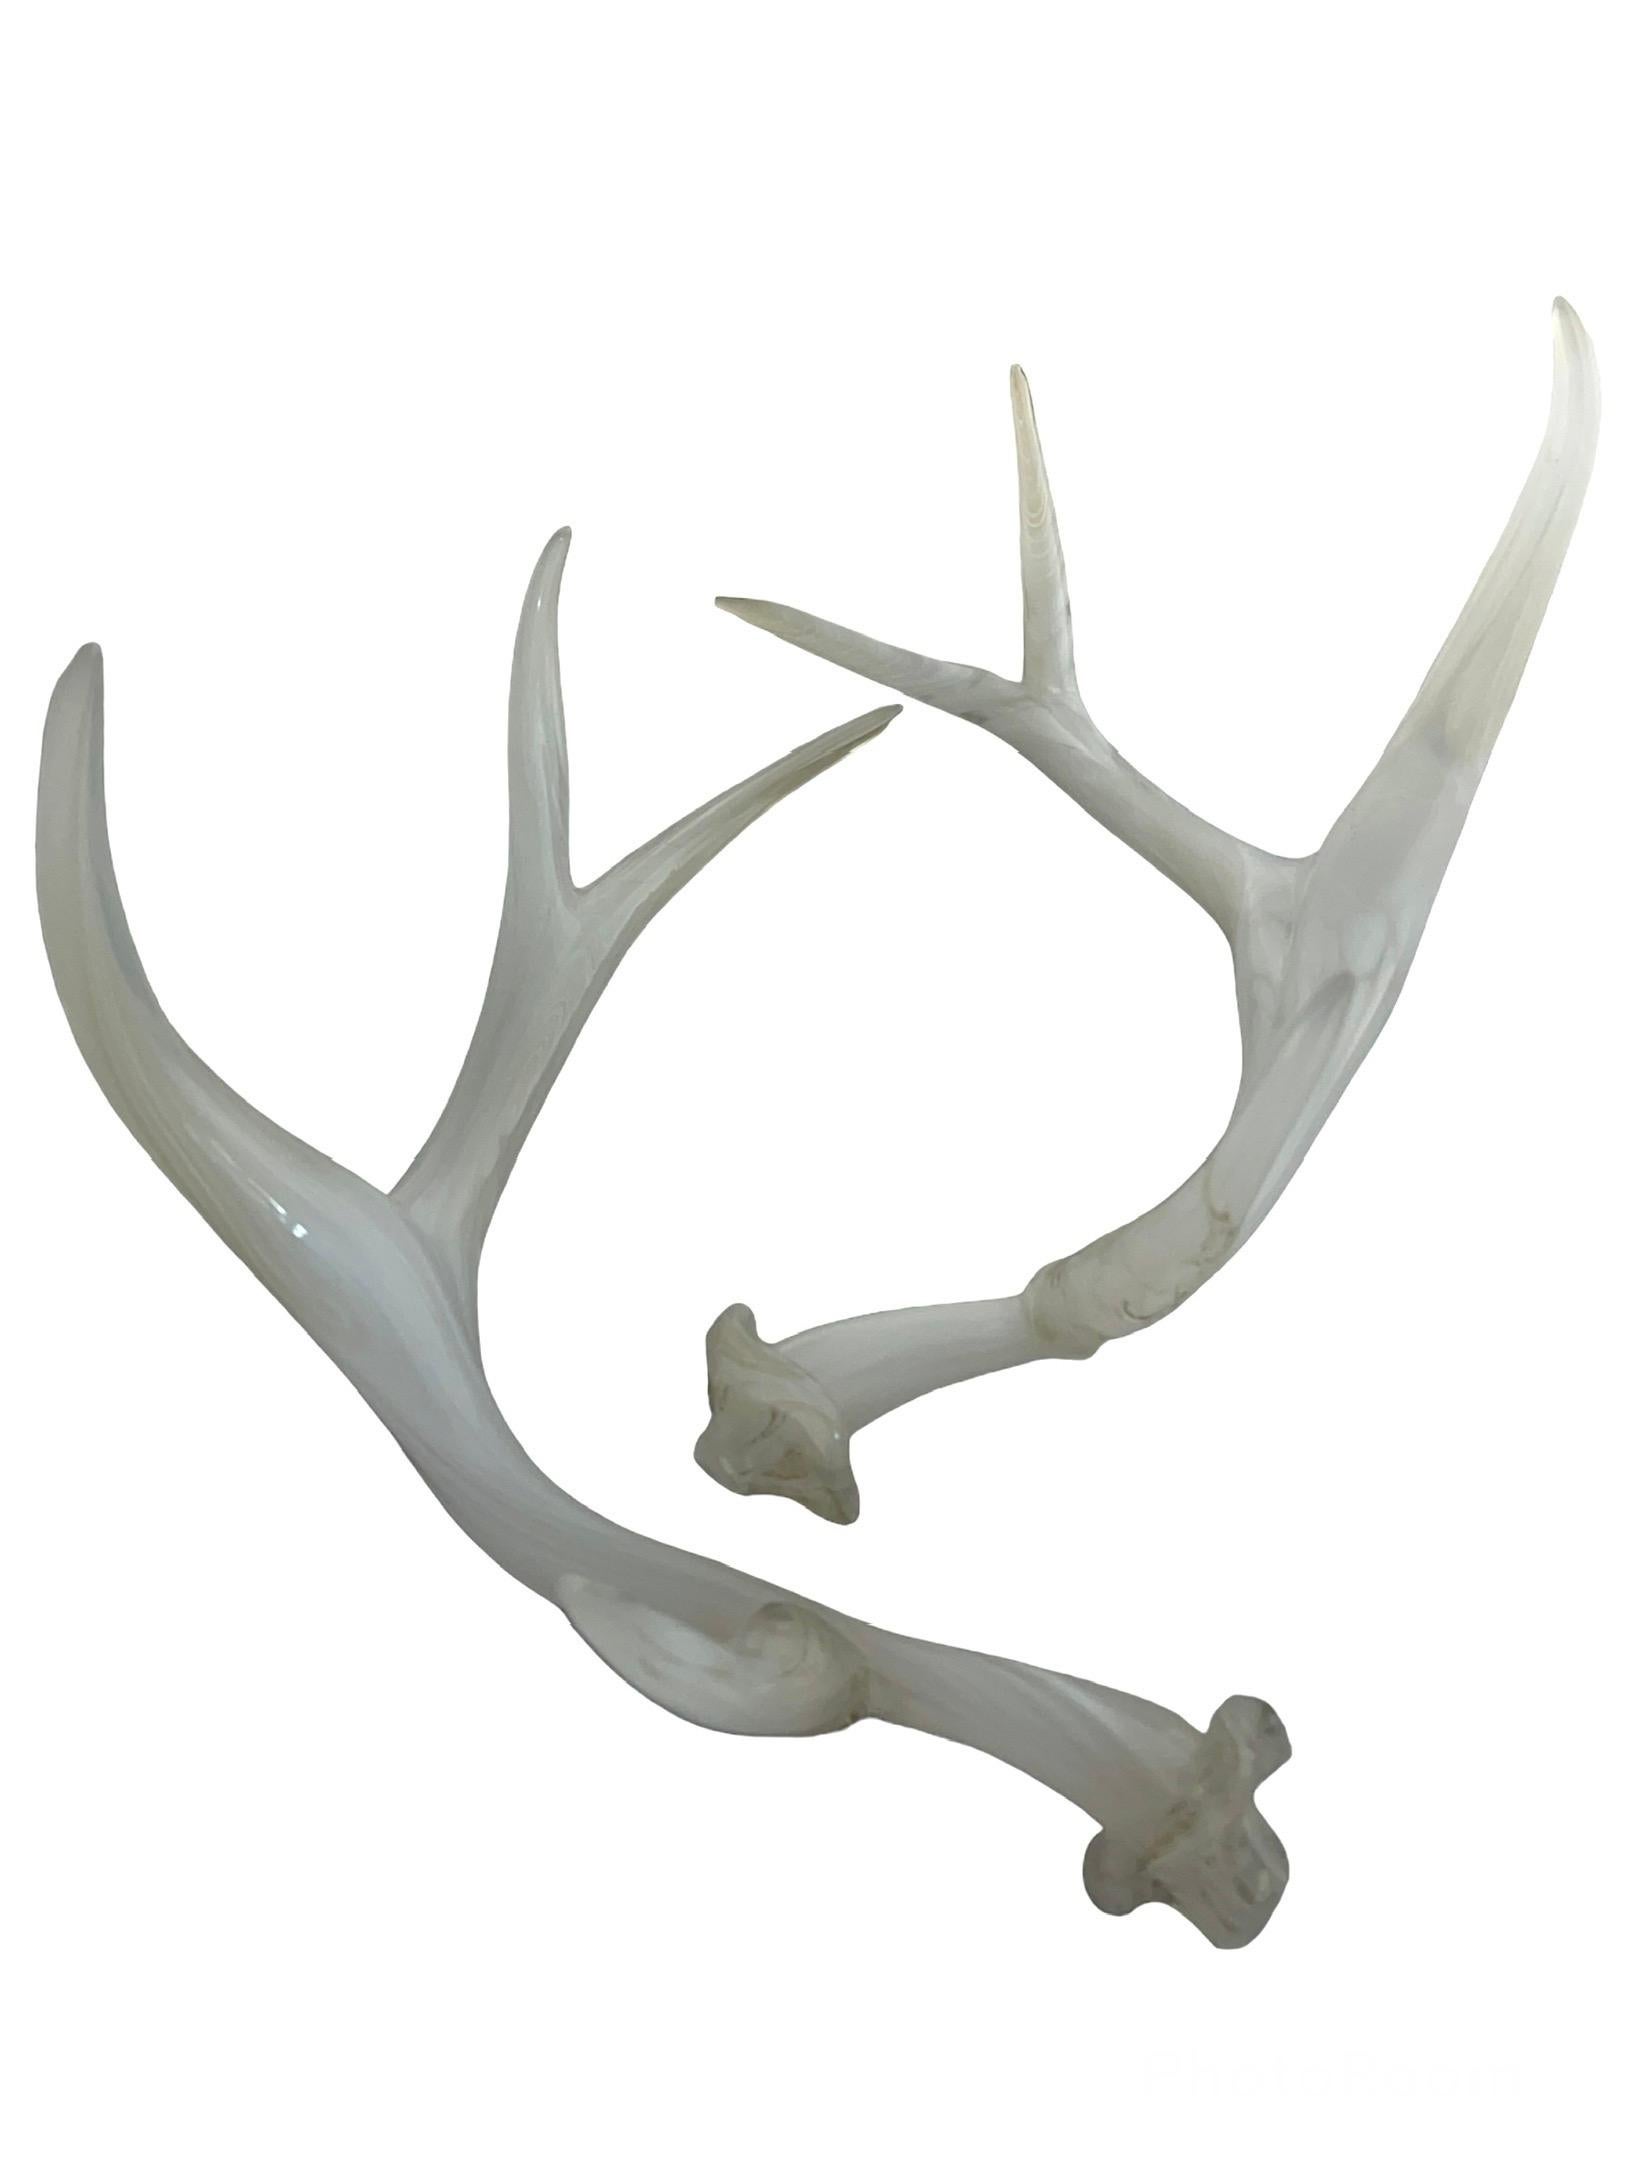 Glass Antlers, white - Gray Figurative Sculpture by Ira Lujan